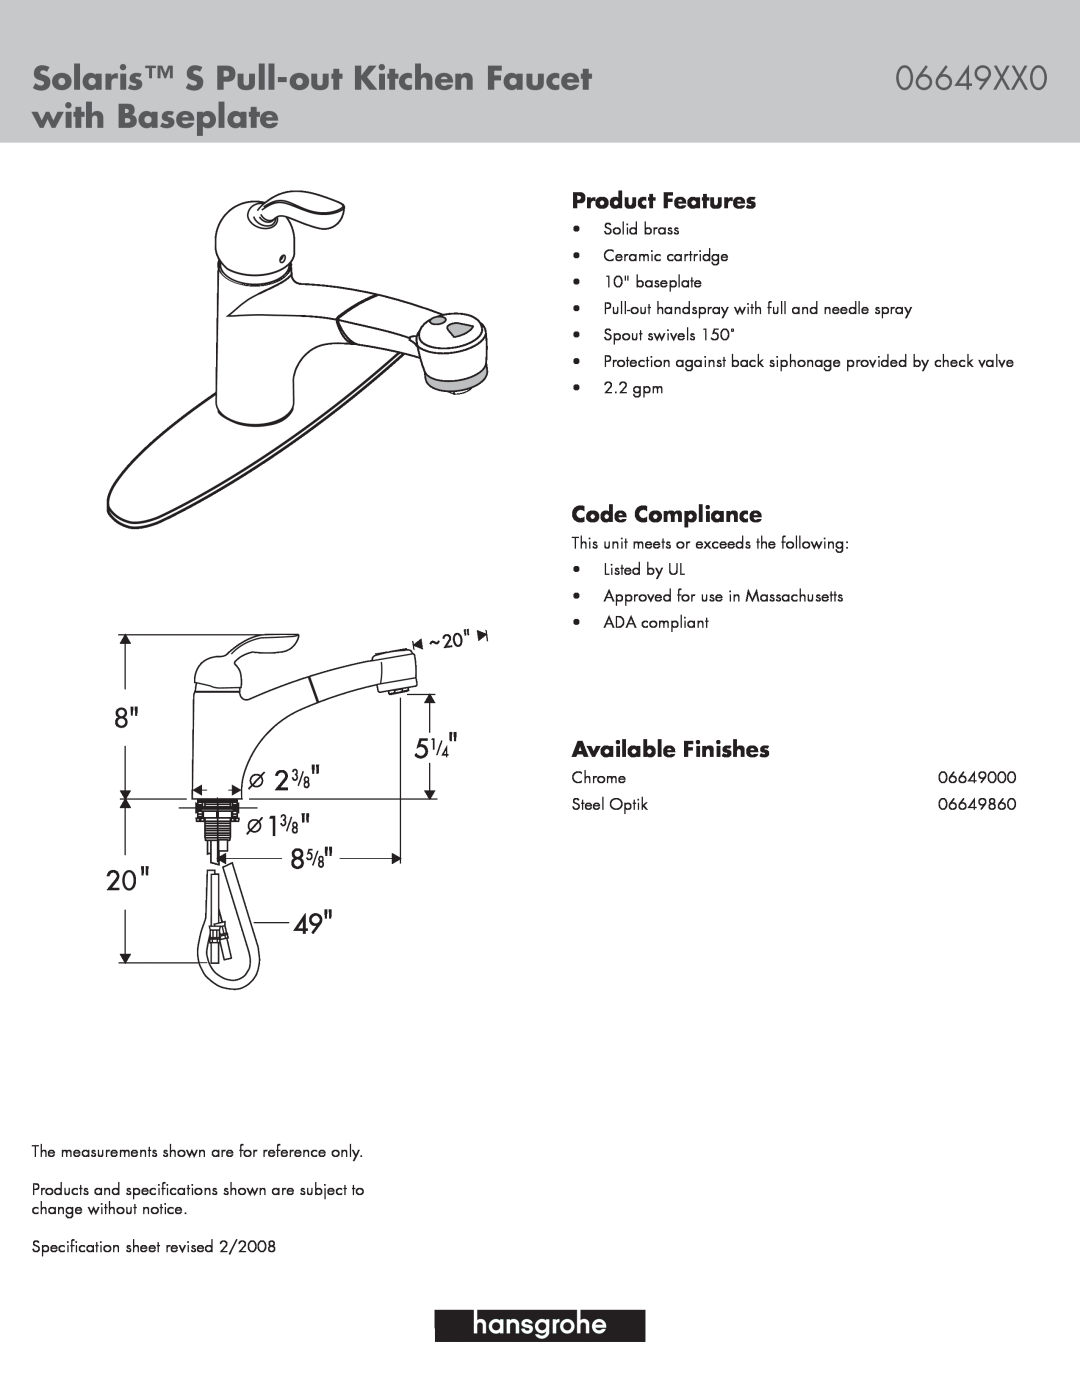 Axor 06649XX0 specifications Solaris S Pull-out Kitchen Faucet, with Baseplate, Product Features, Code Compliance 